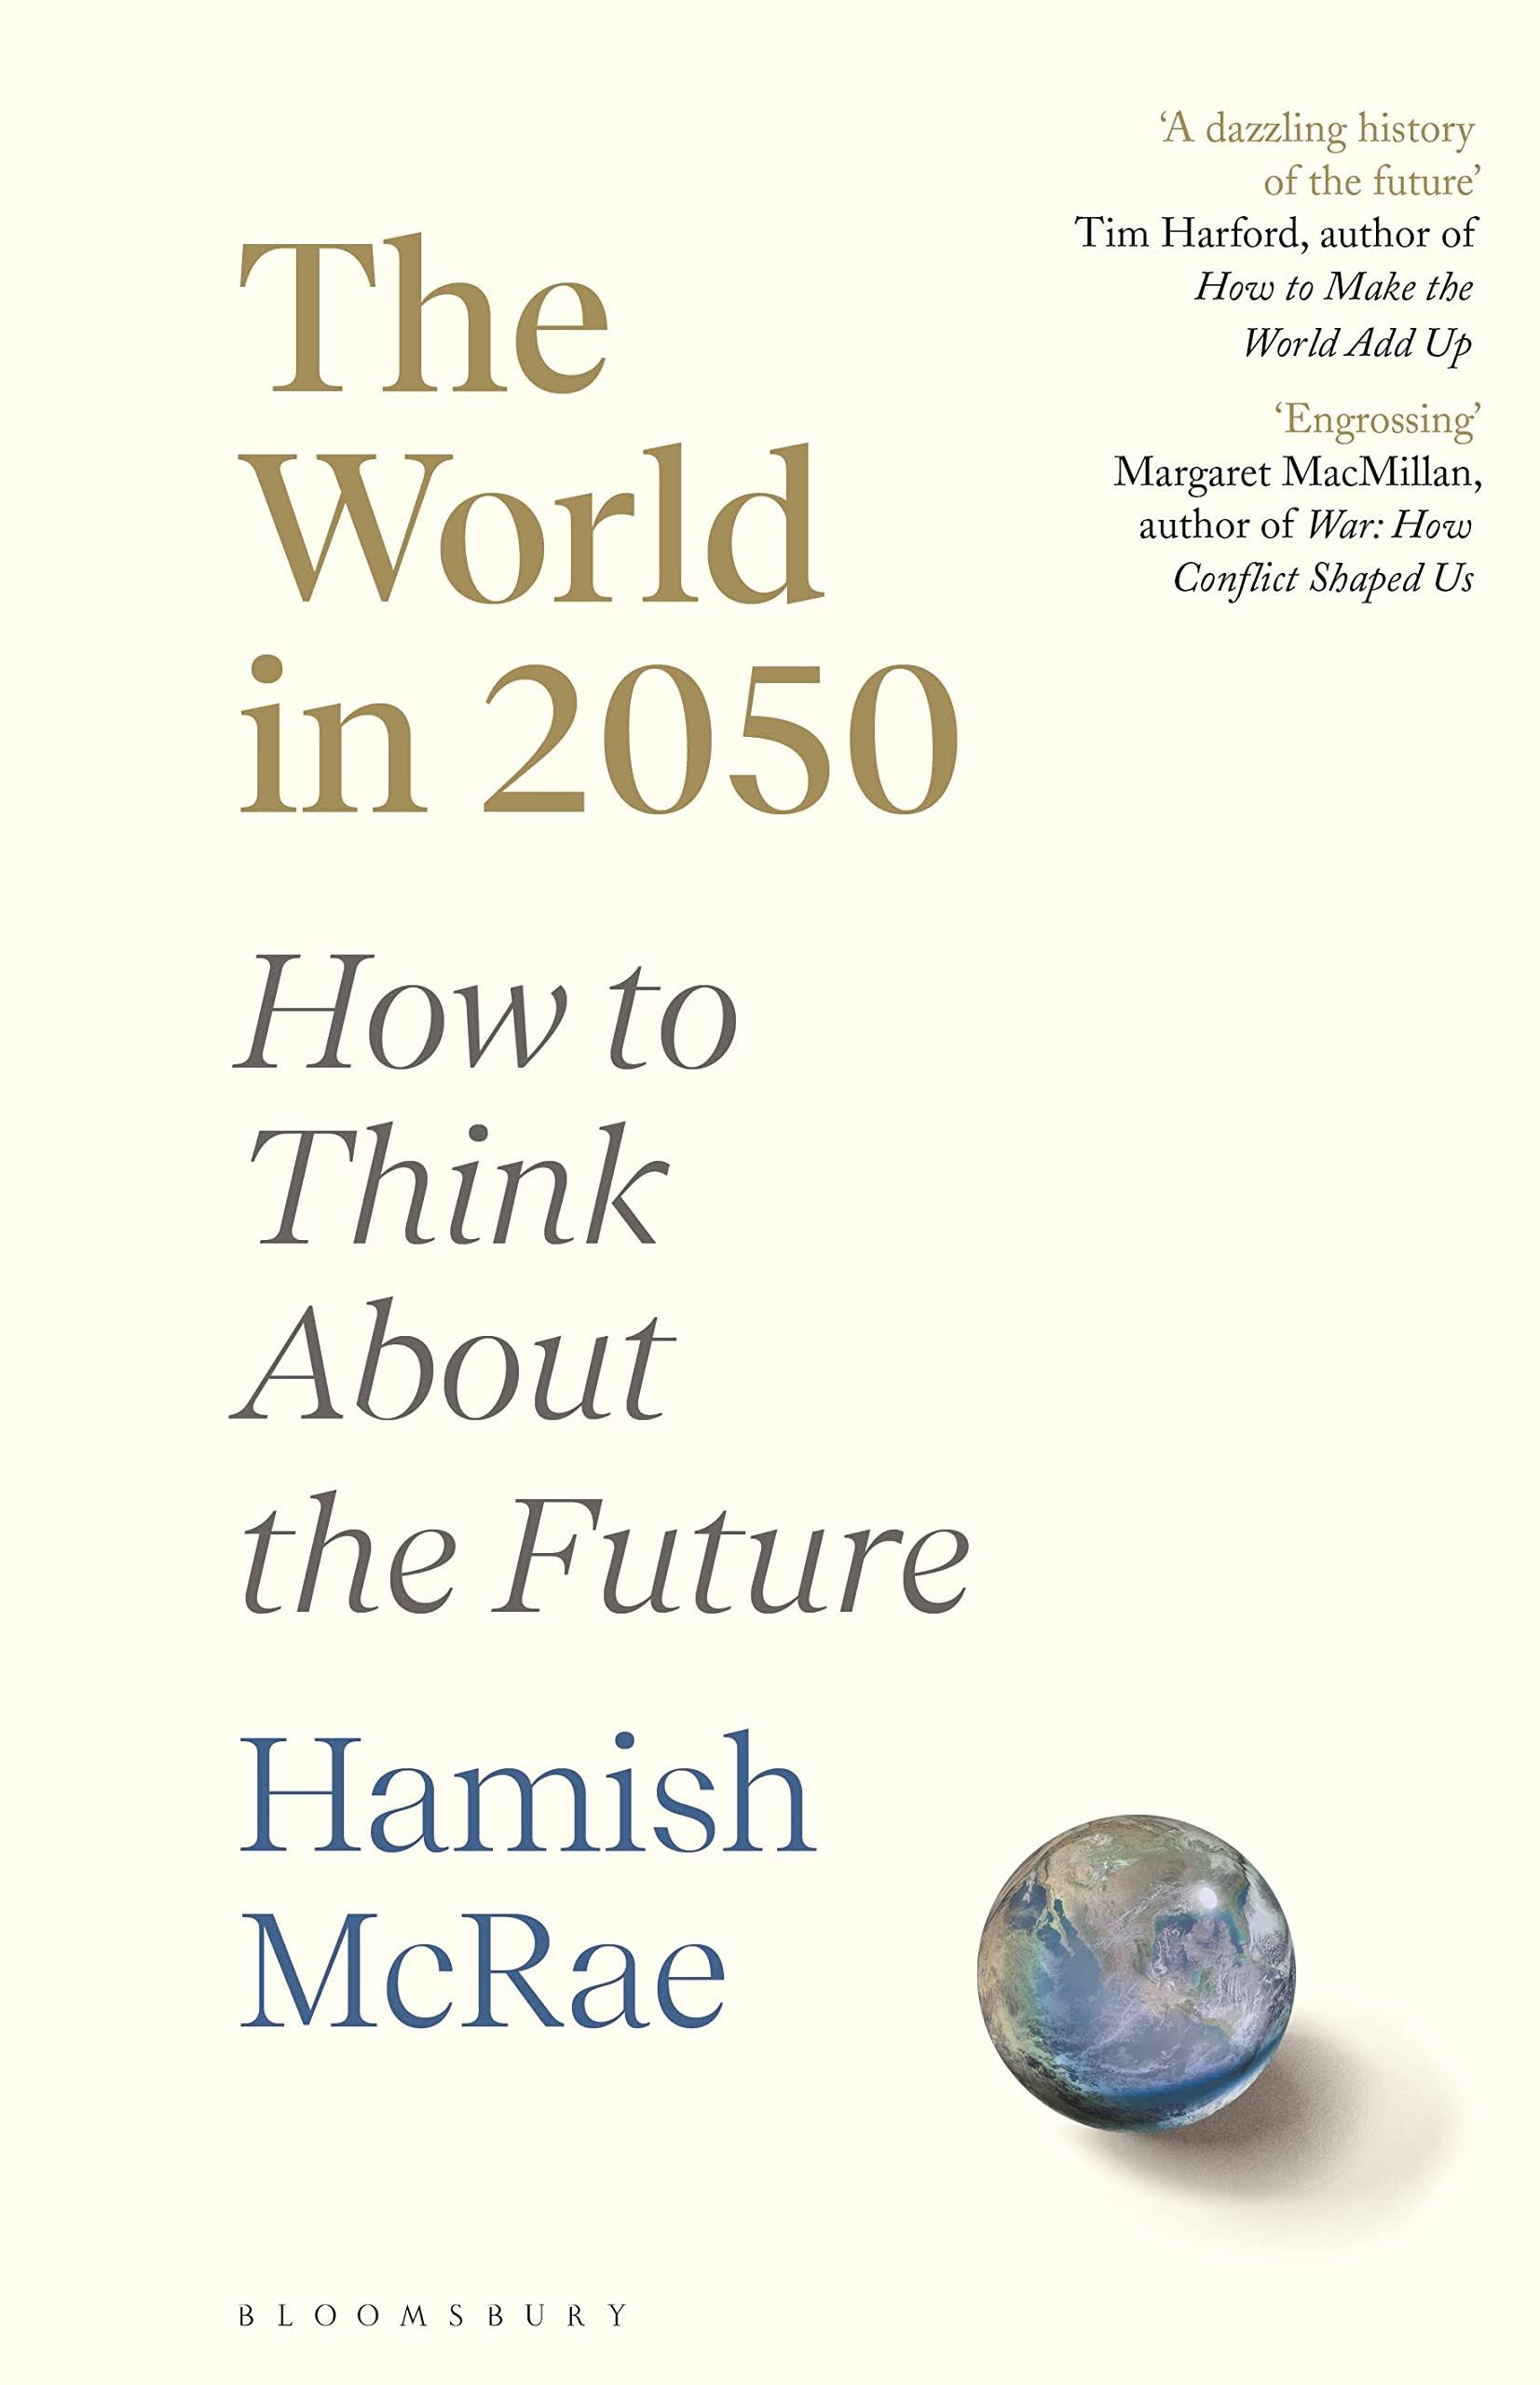 The world in 2050